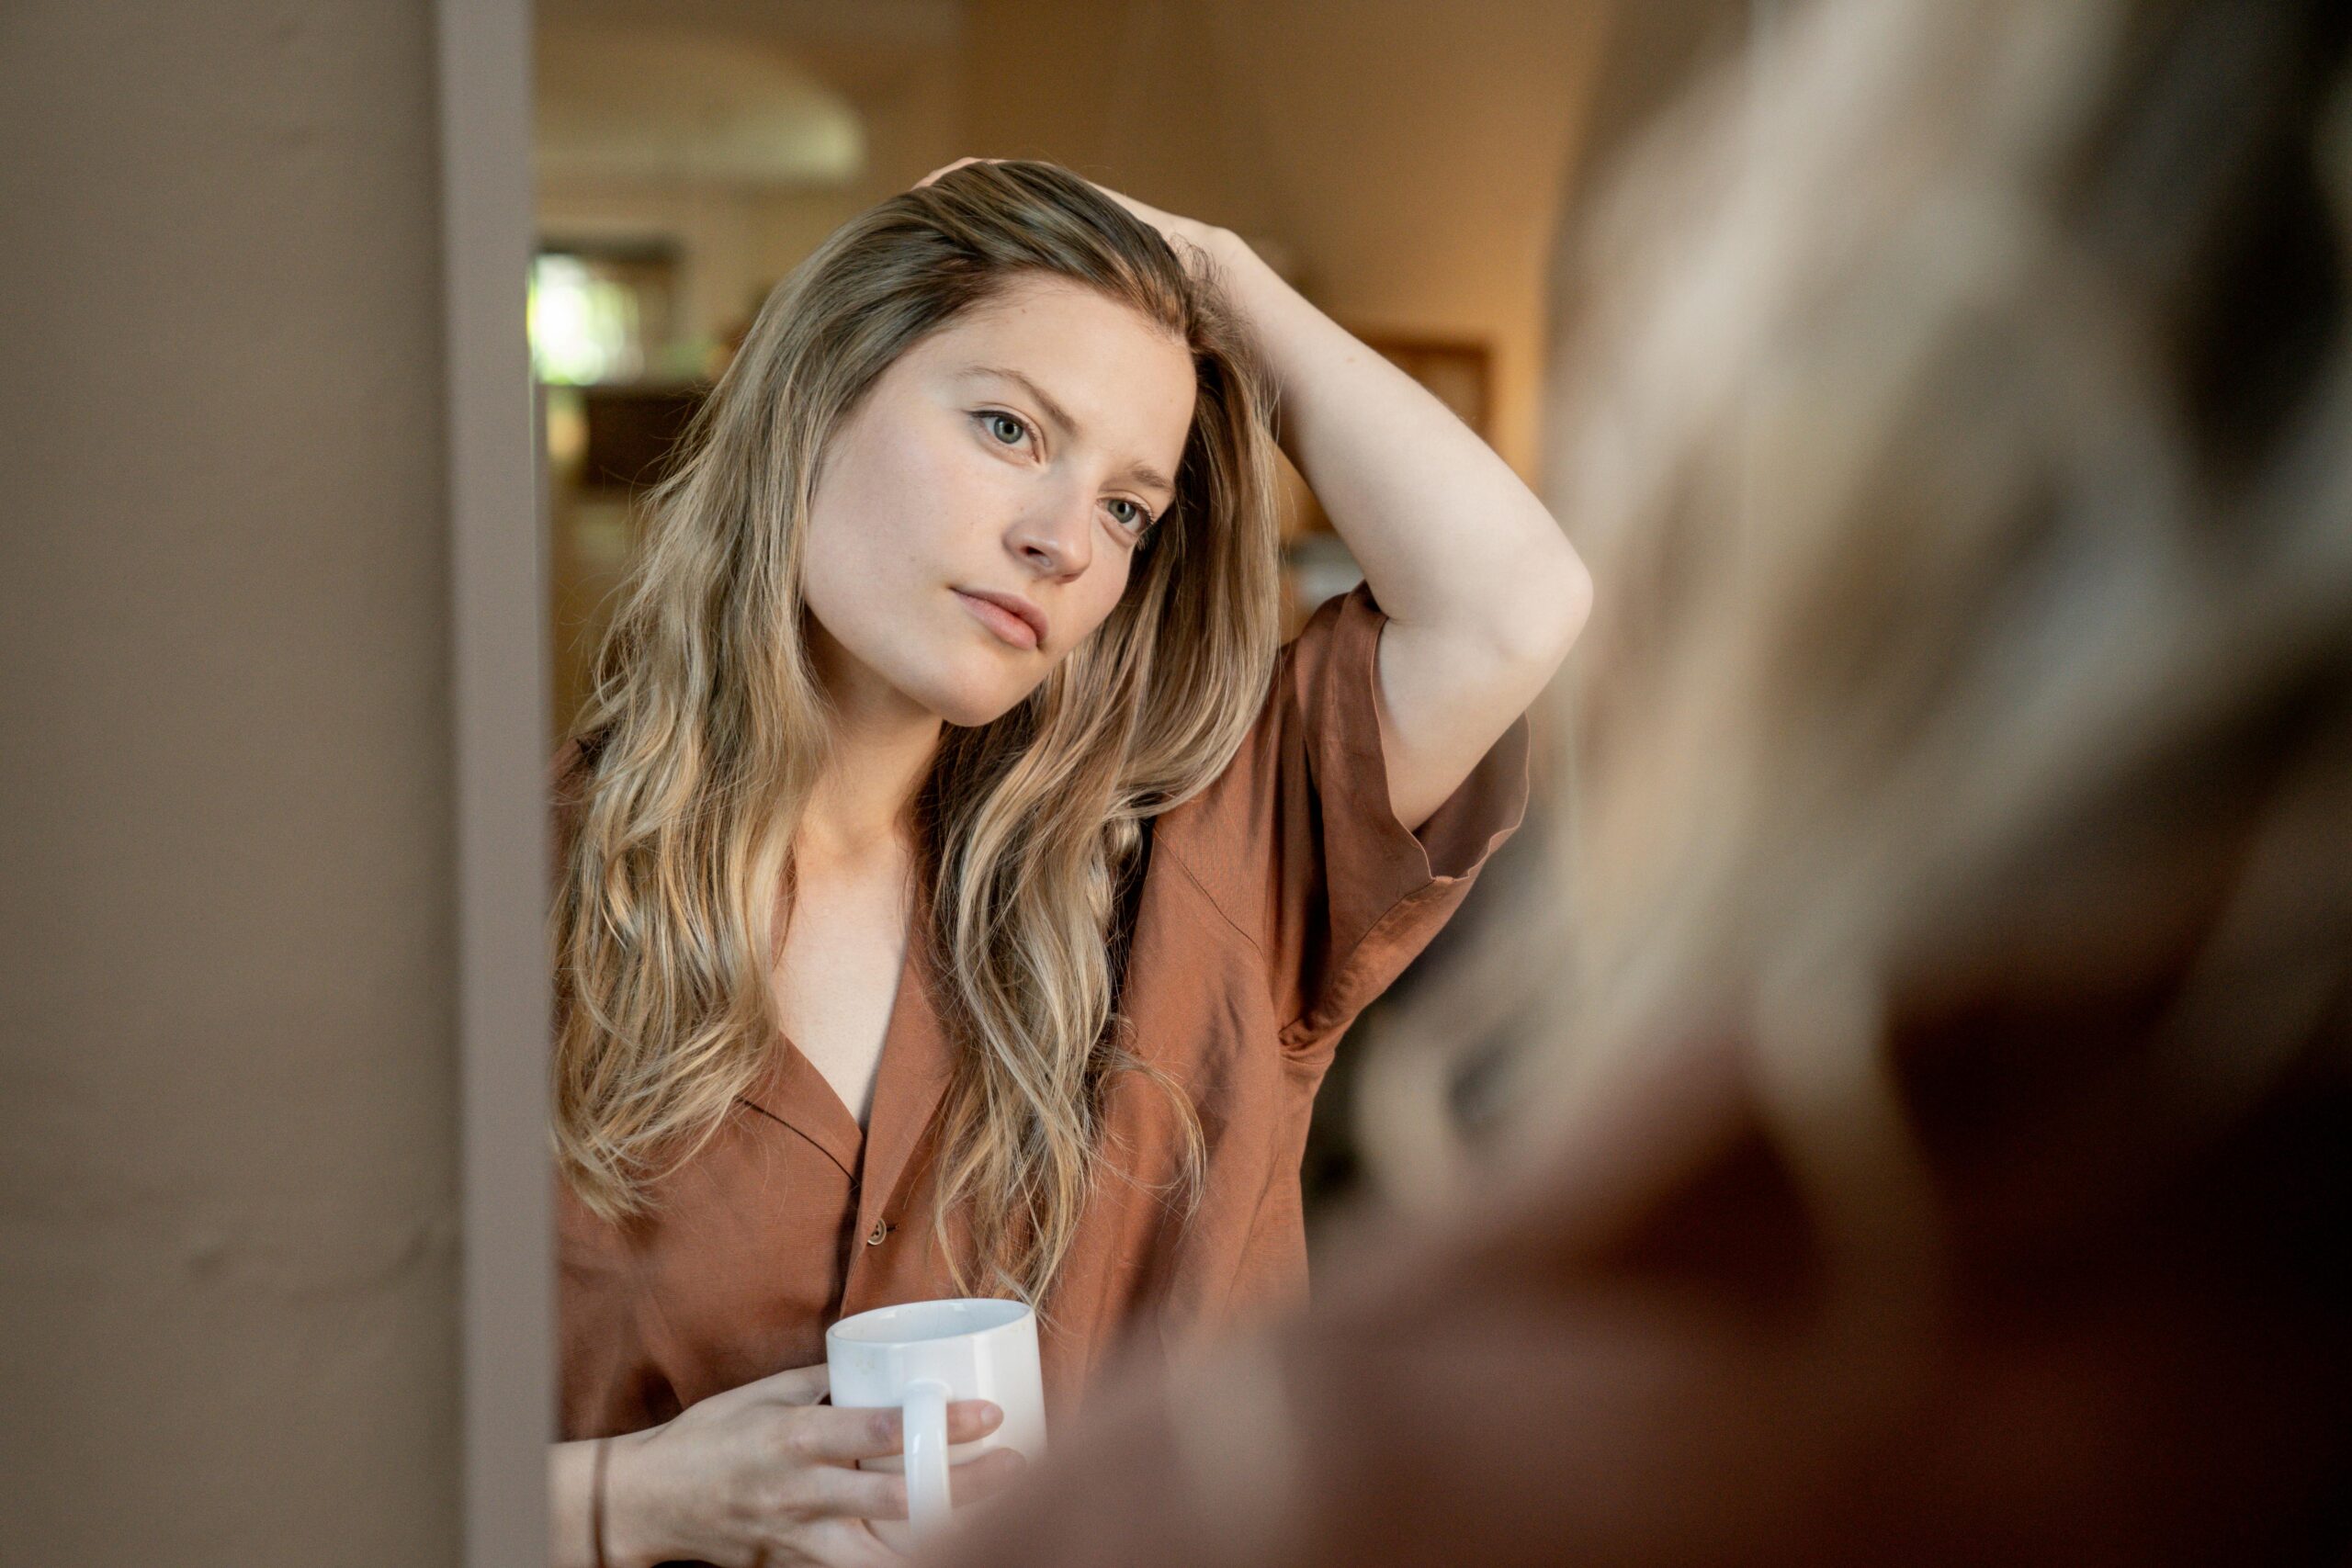 Woman looking at reflection in mirror with self-doubt